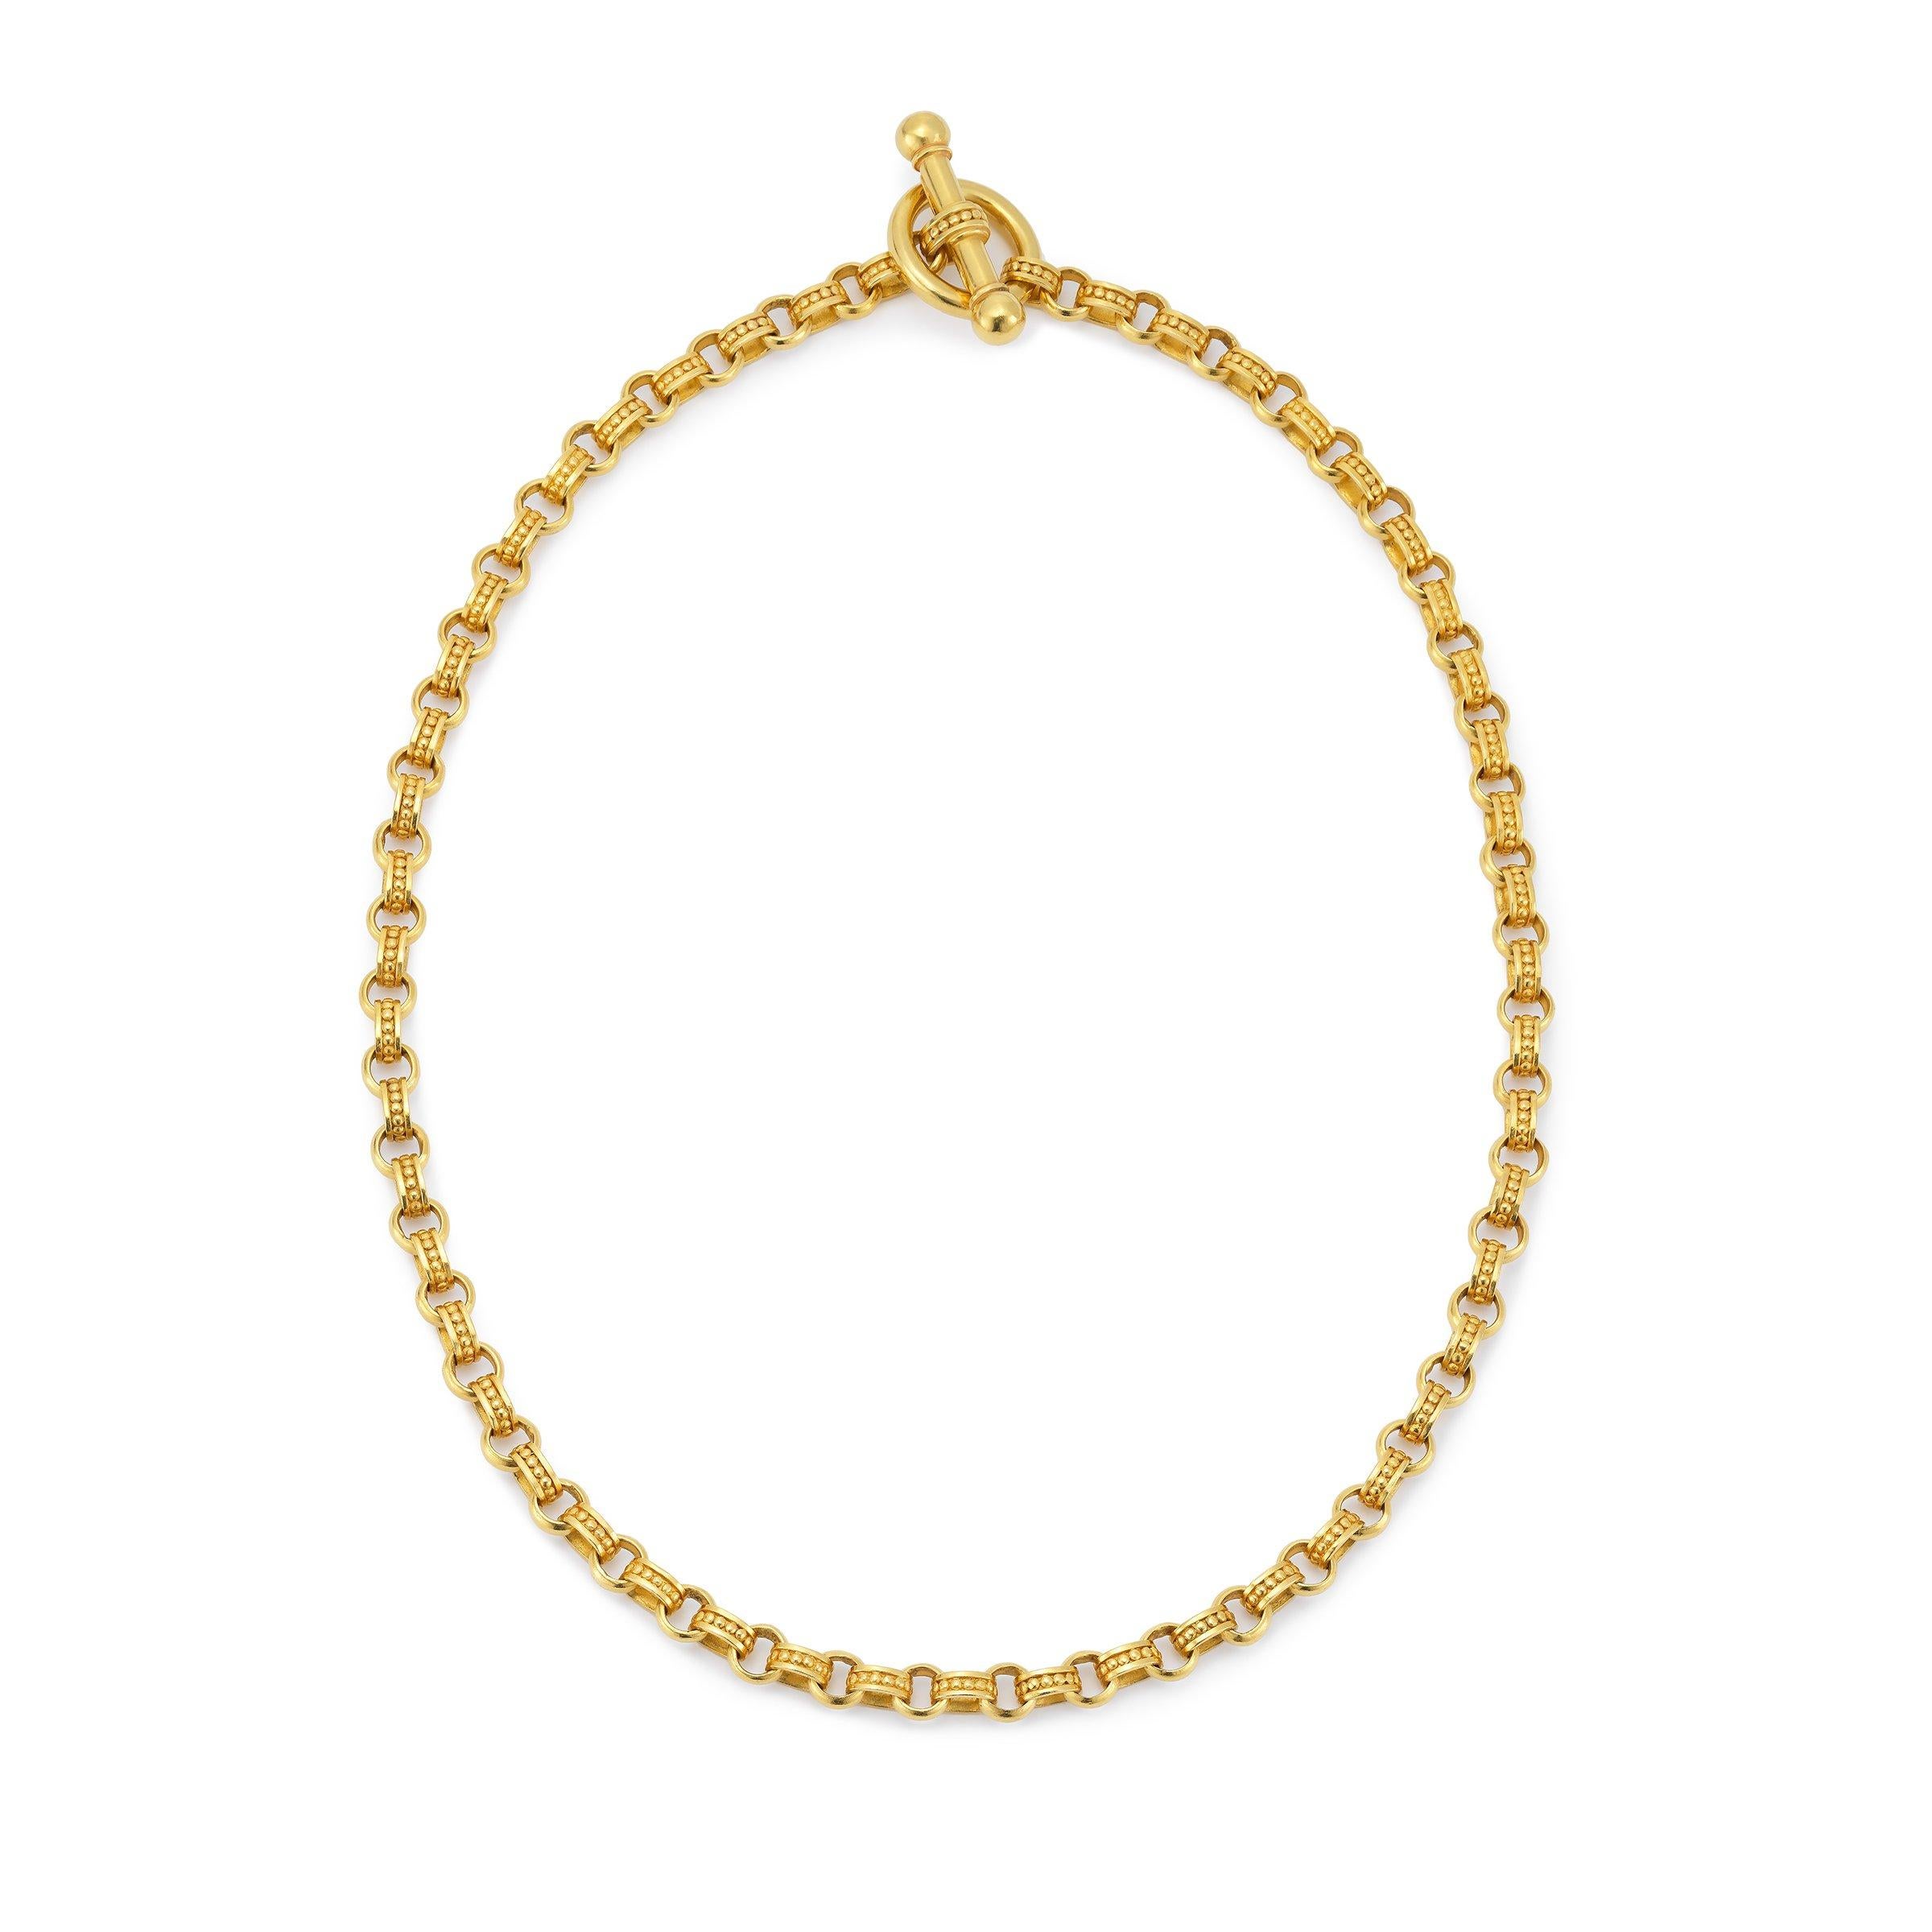 Carolyn Tyler 18K Gold Link Lariat Chain with granulated links.  Made in Bali by fine craftsmen who have passed the granulation techniques down from generation to generation.  This beautiful necklace has a toggle clasp which can be worn as a